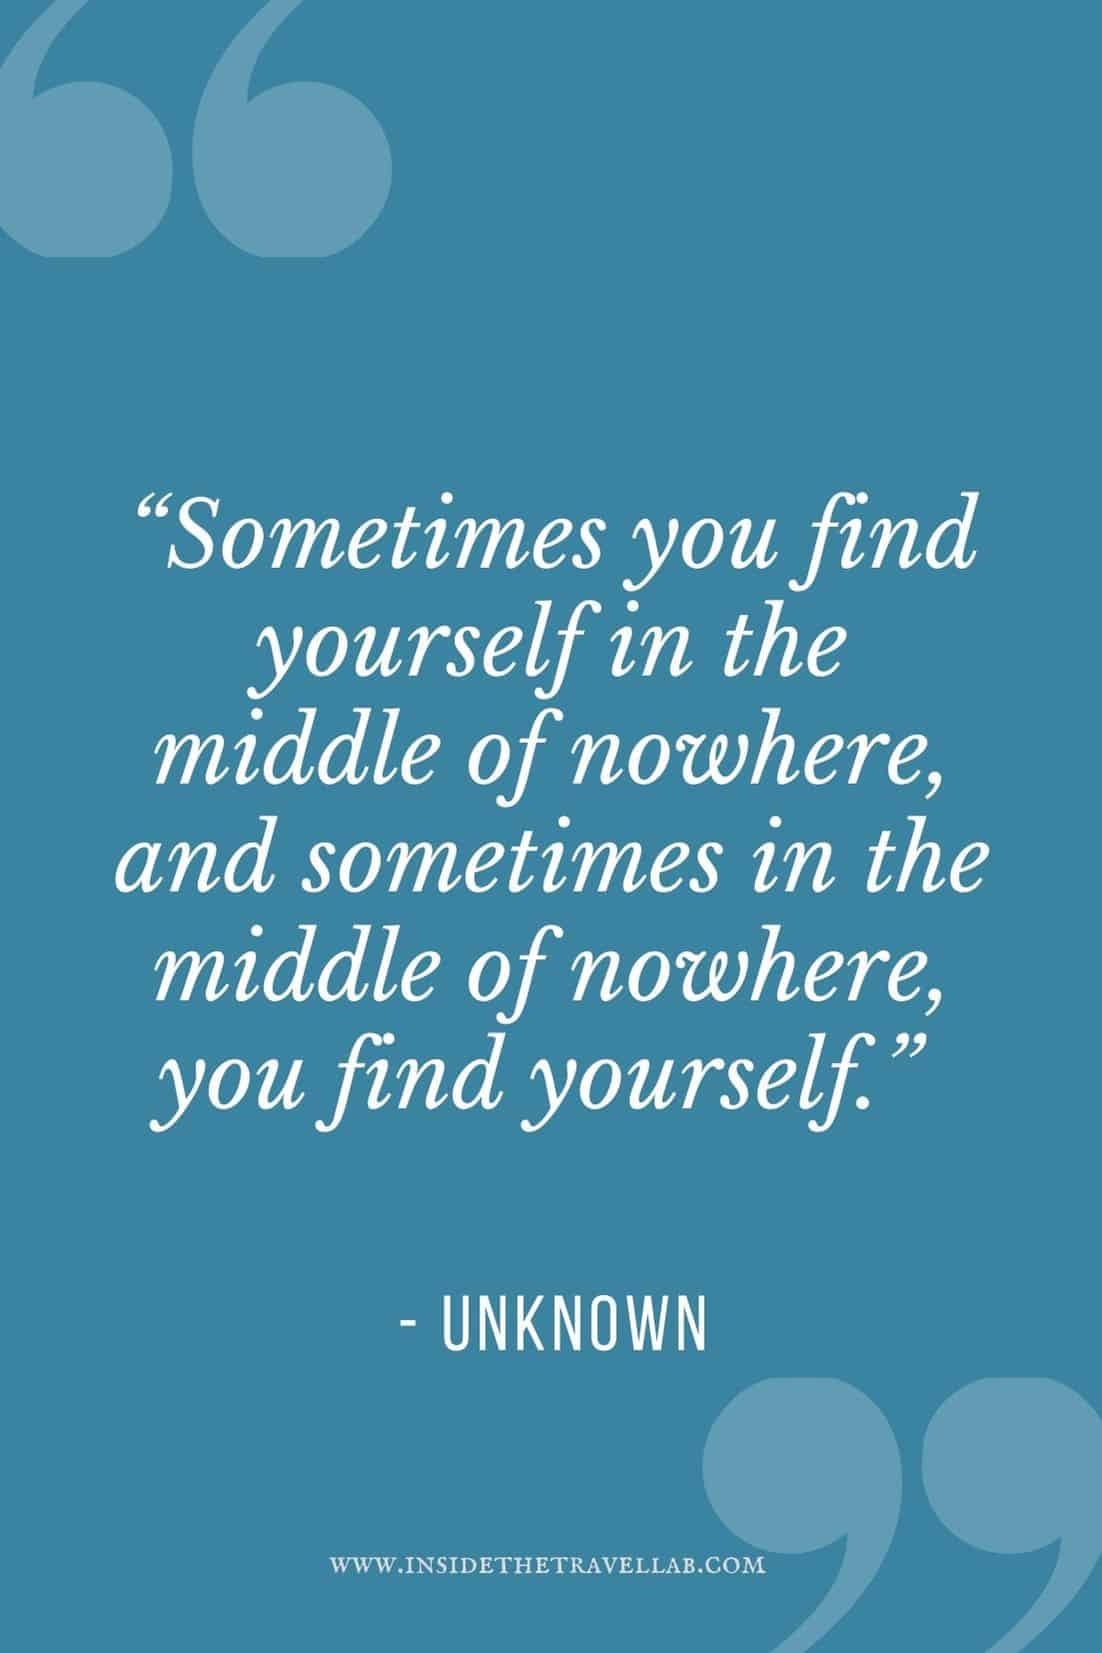 Sometimes you find yourself in the middle of nowhere travel quote